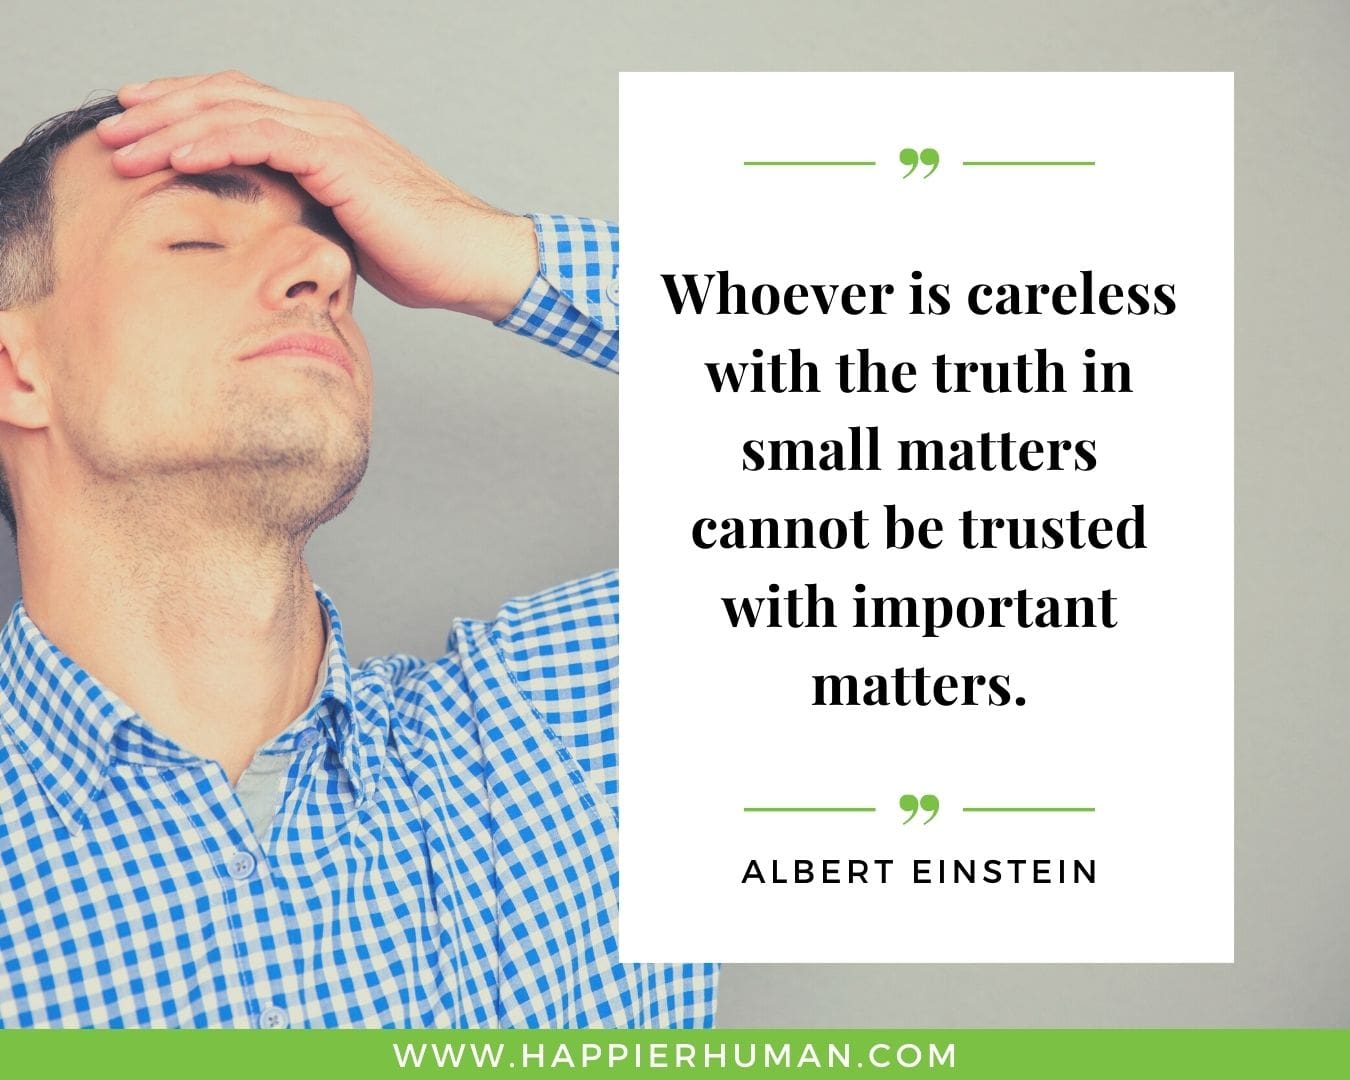 Broken Trust Quotes - “Whoever is careless with the truth in small matters cannot be trusted with important matters.” - Albert Einstein